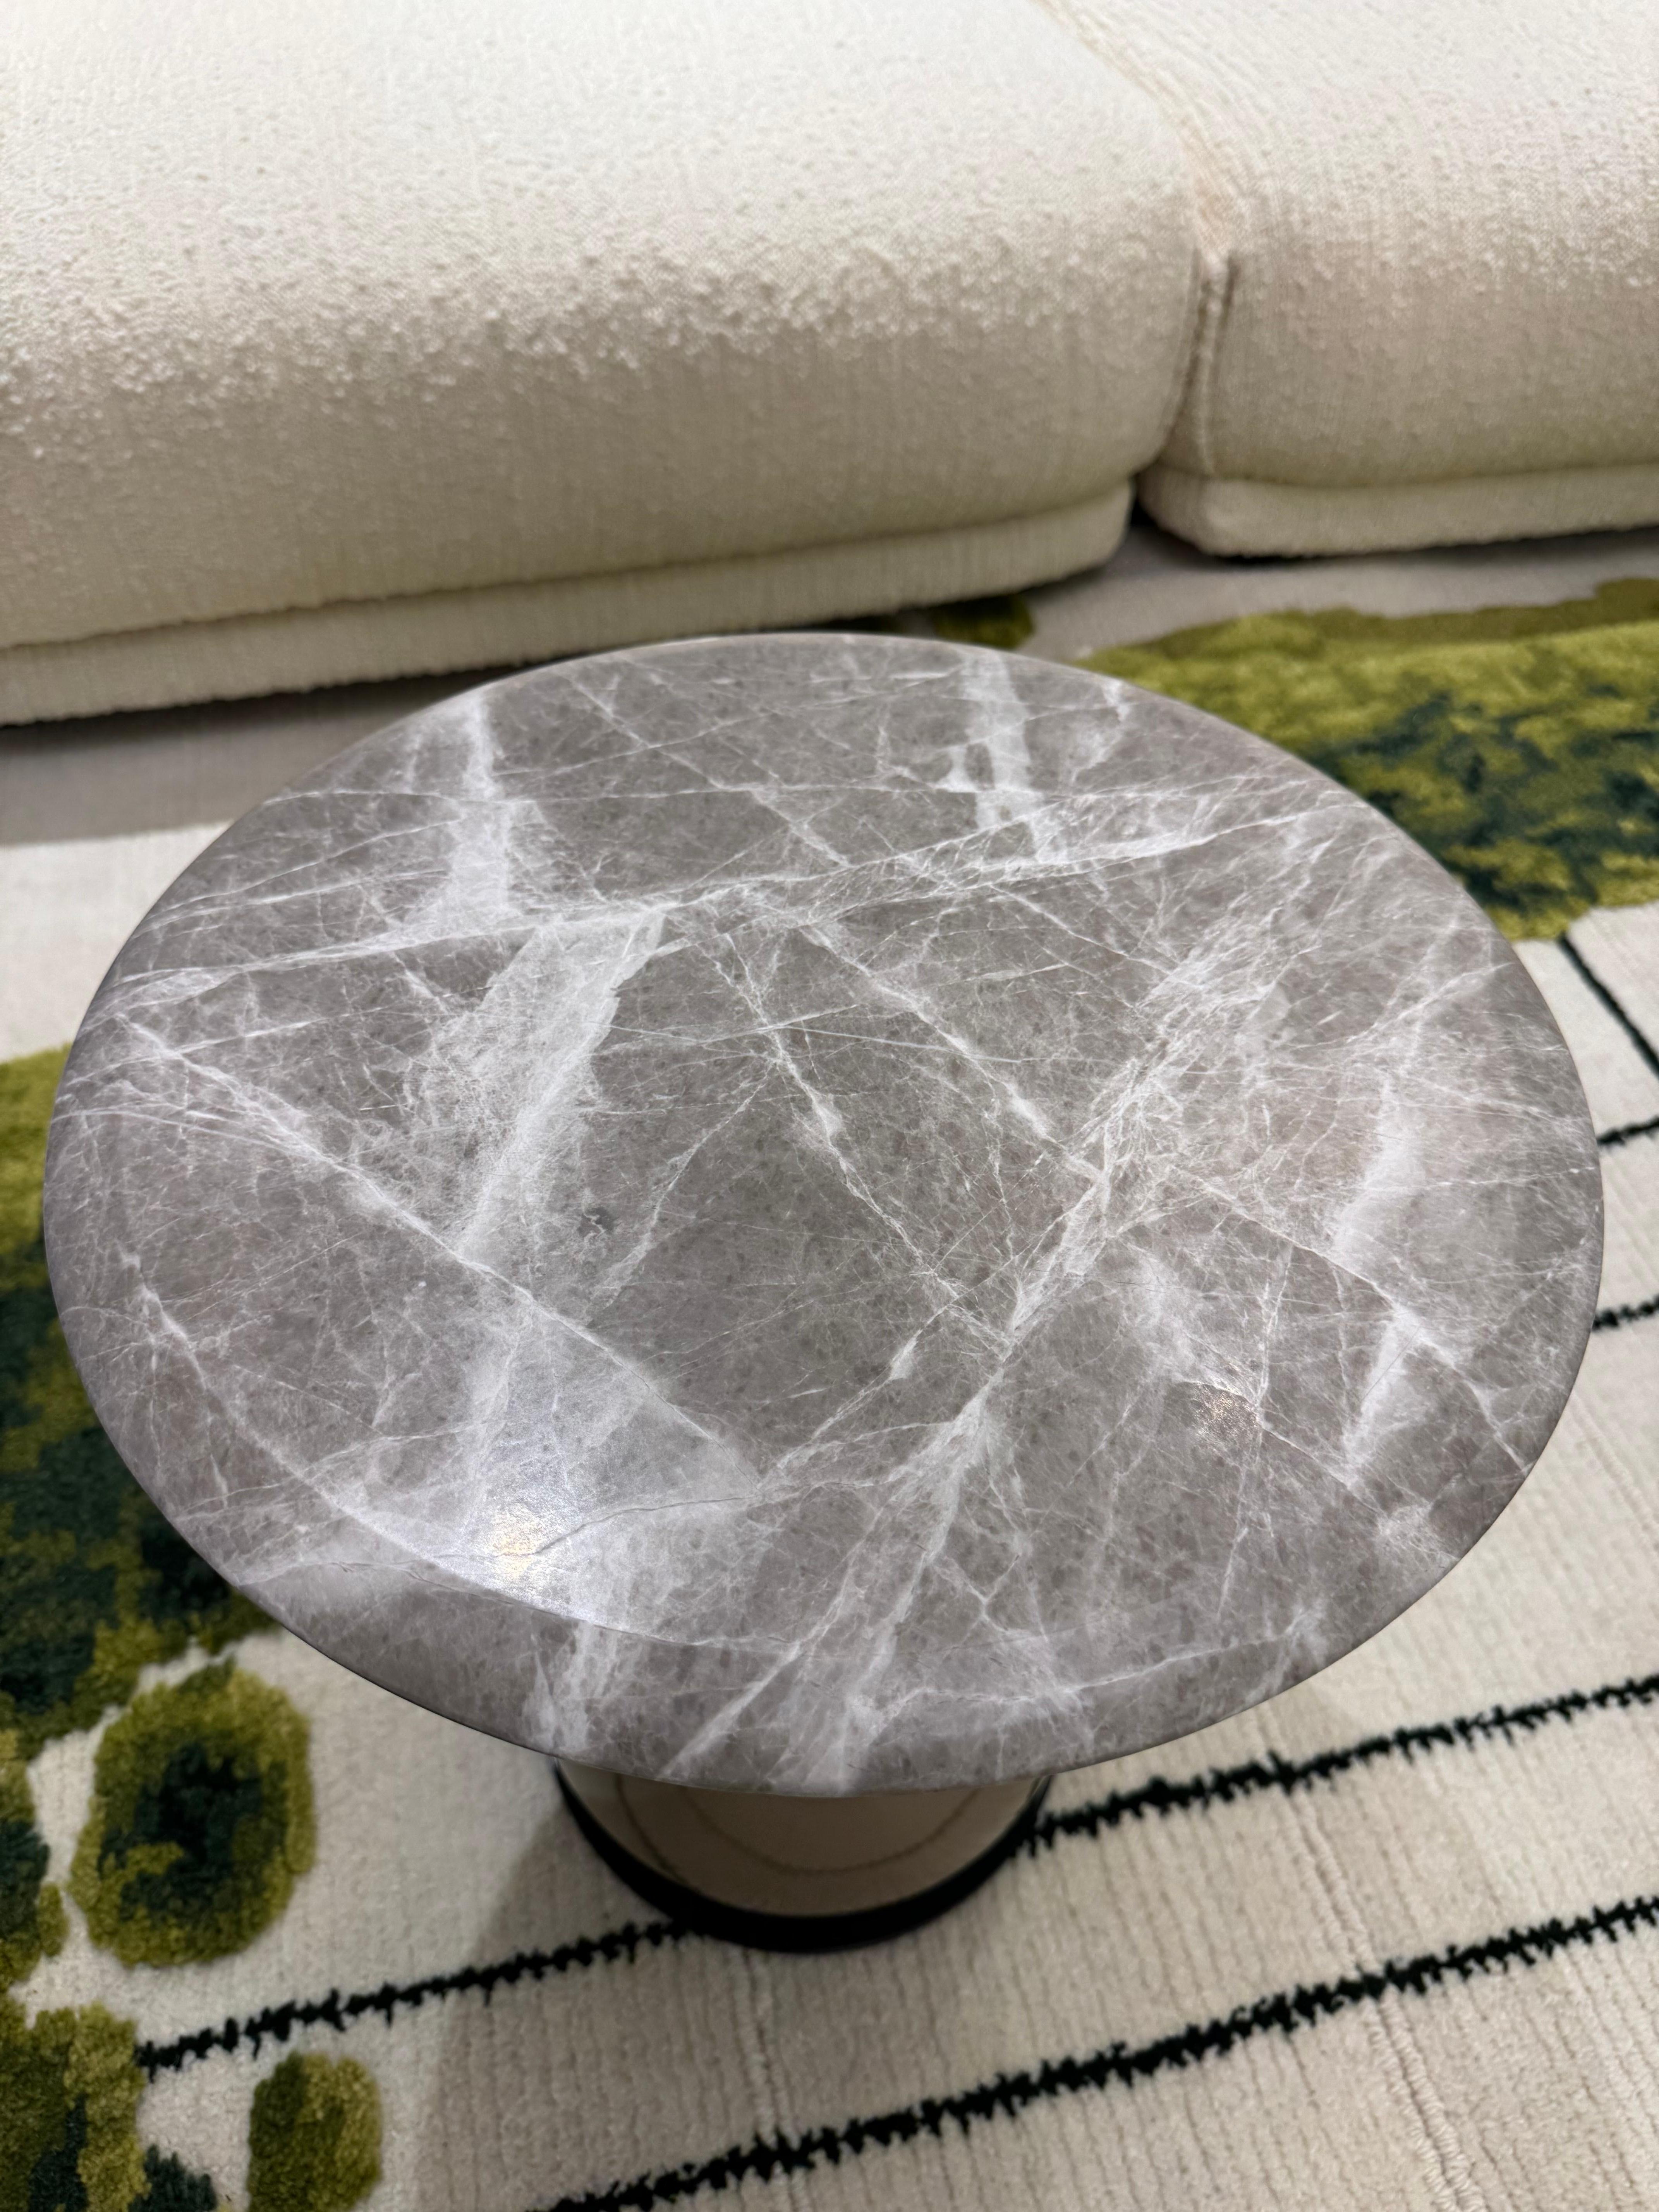 Gem Table in Marble
Top in Marble Emperador tundra in 30 mm thickness
Legs in liquid painted Bronze
Size : Dia.400xh430 mm

The Gem table boasts an interactive design. Its configuration is reminiscent of the stacked towers made of round pebbles on